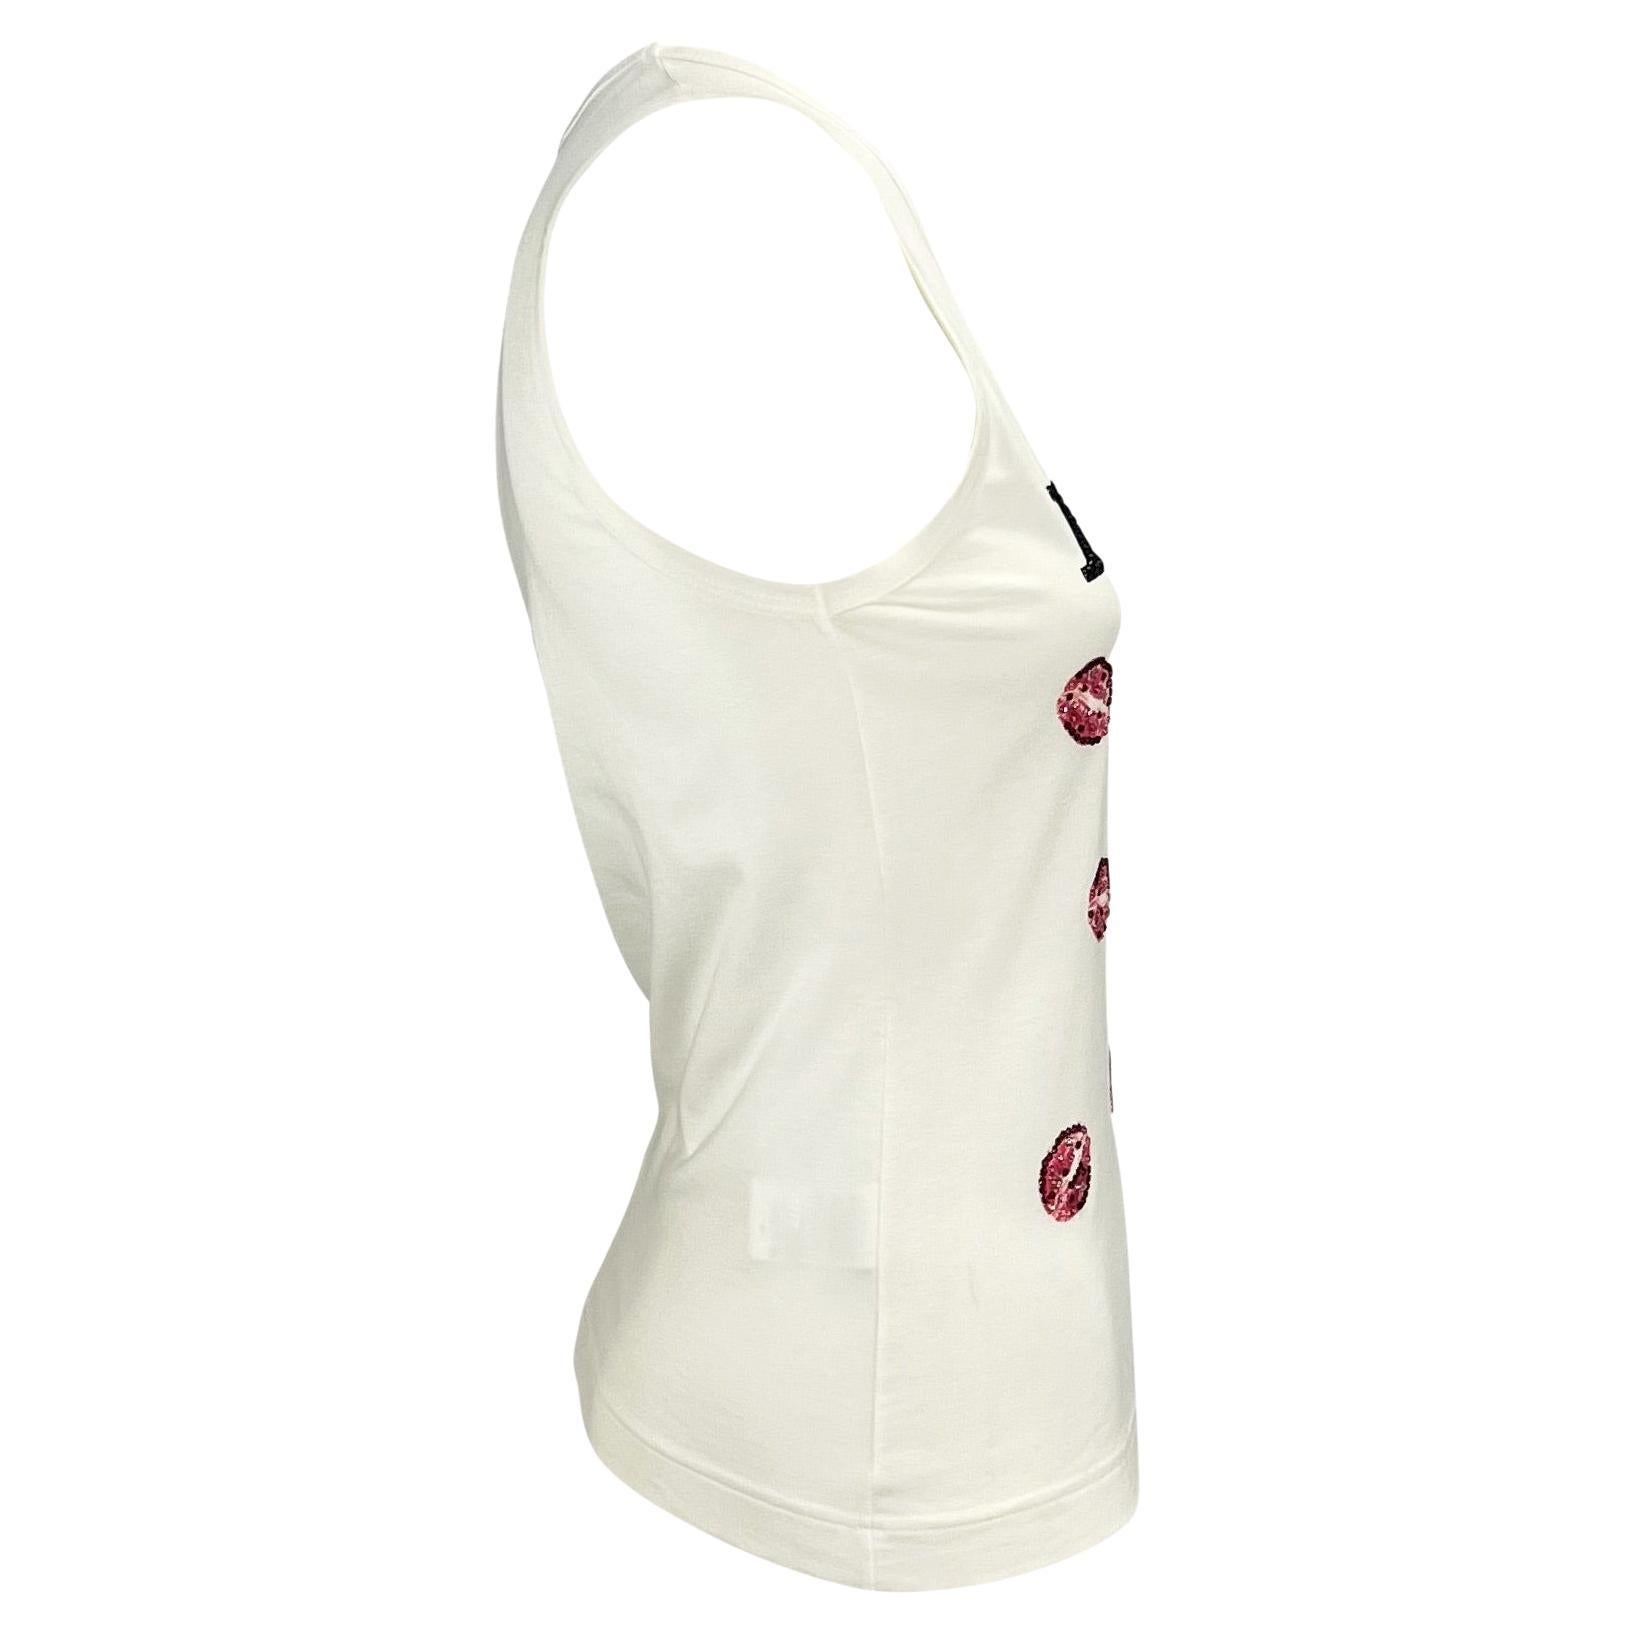 NWT F/W 2001 Dolce & Gabbana White Rhinestone 'Kiss' Tank Top  In Excellent Condition For Sale In West Hollywood, CA